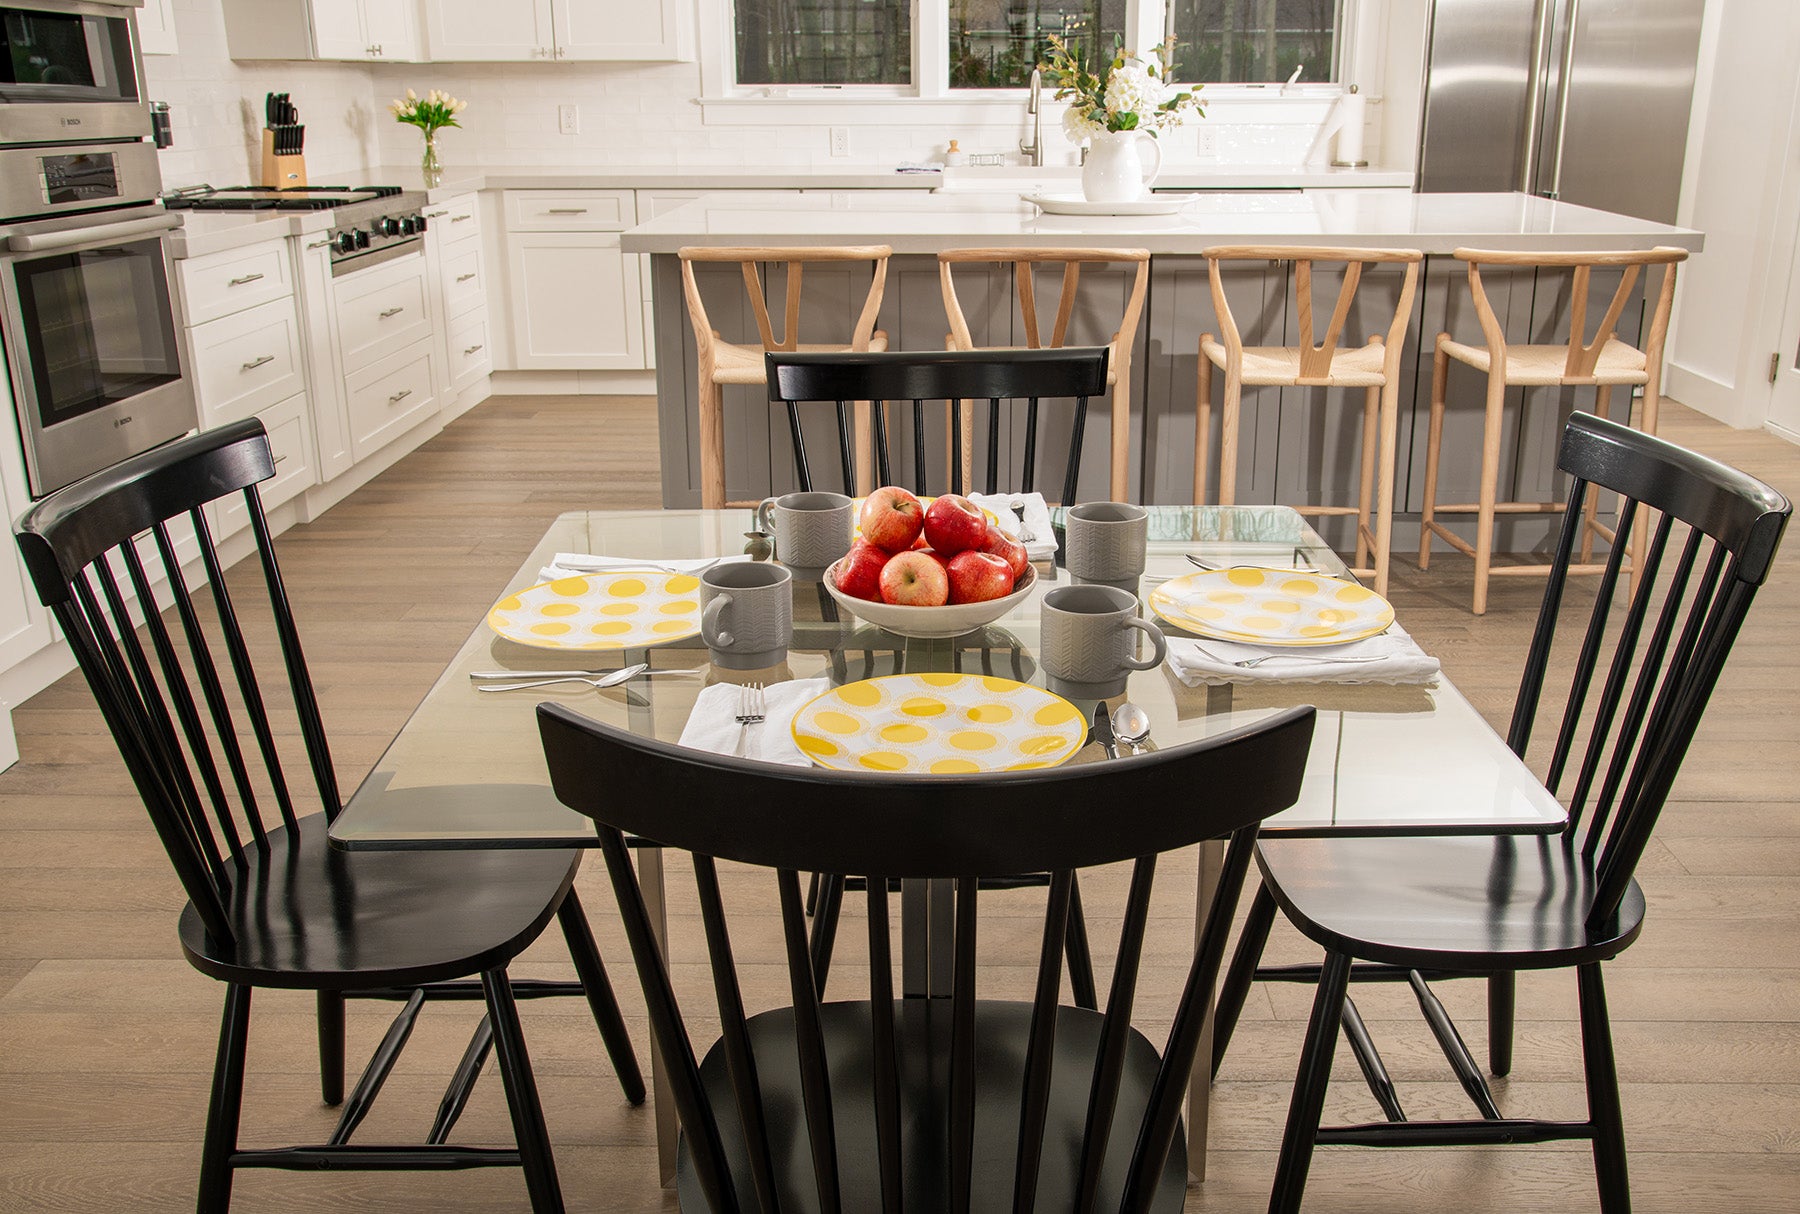 Square glass clear table with yellow polka-dot plates, apples in the middle, and four black wood chairs